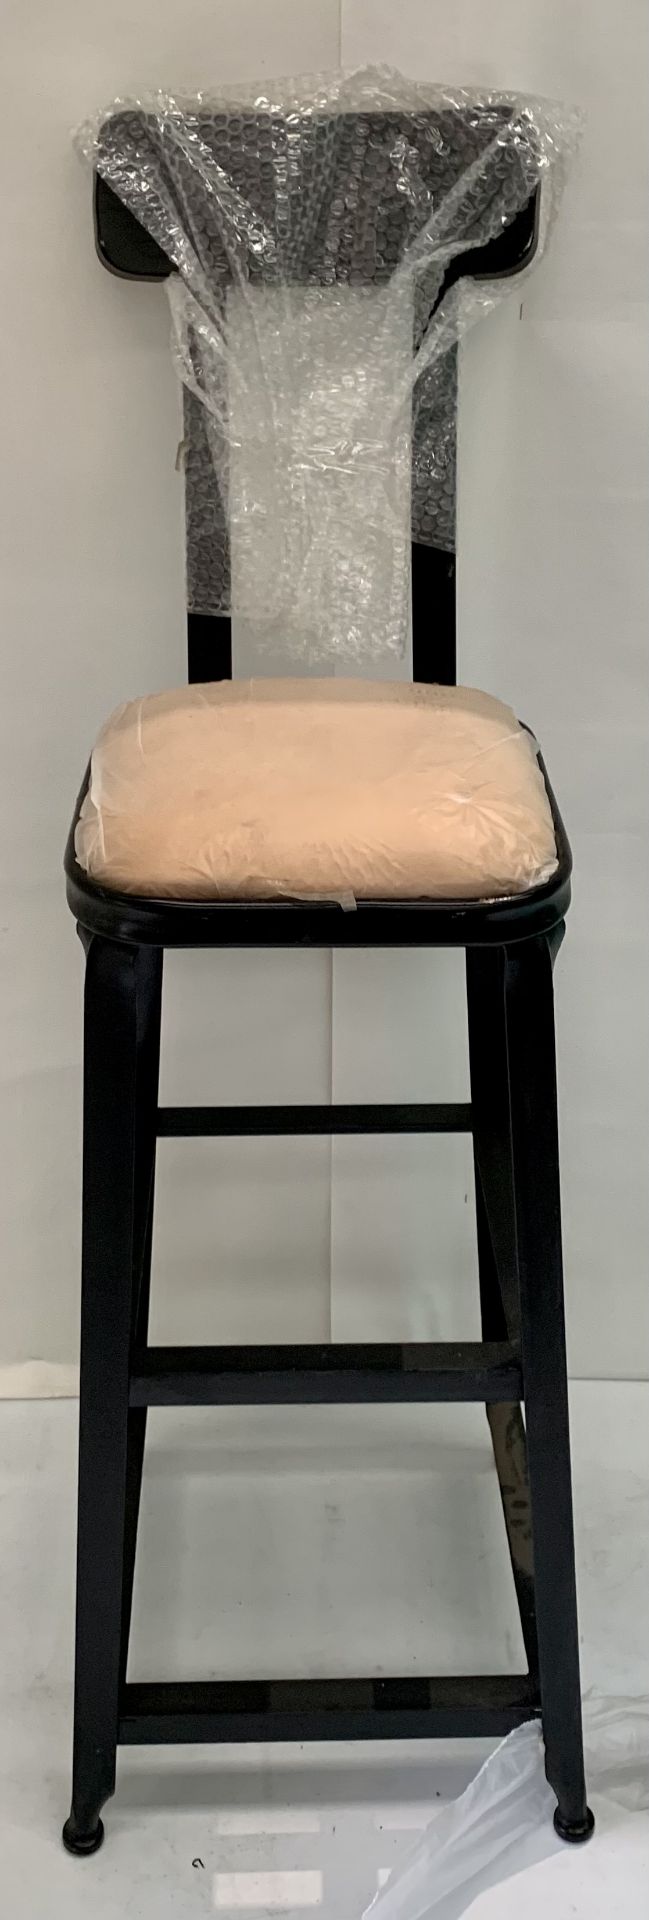 1 x black metal framed high stool with leather seat